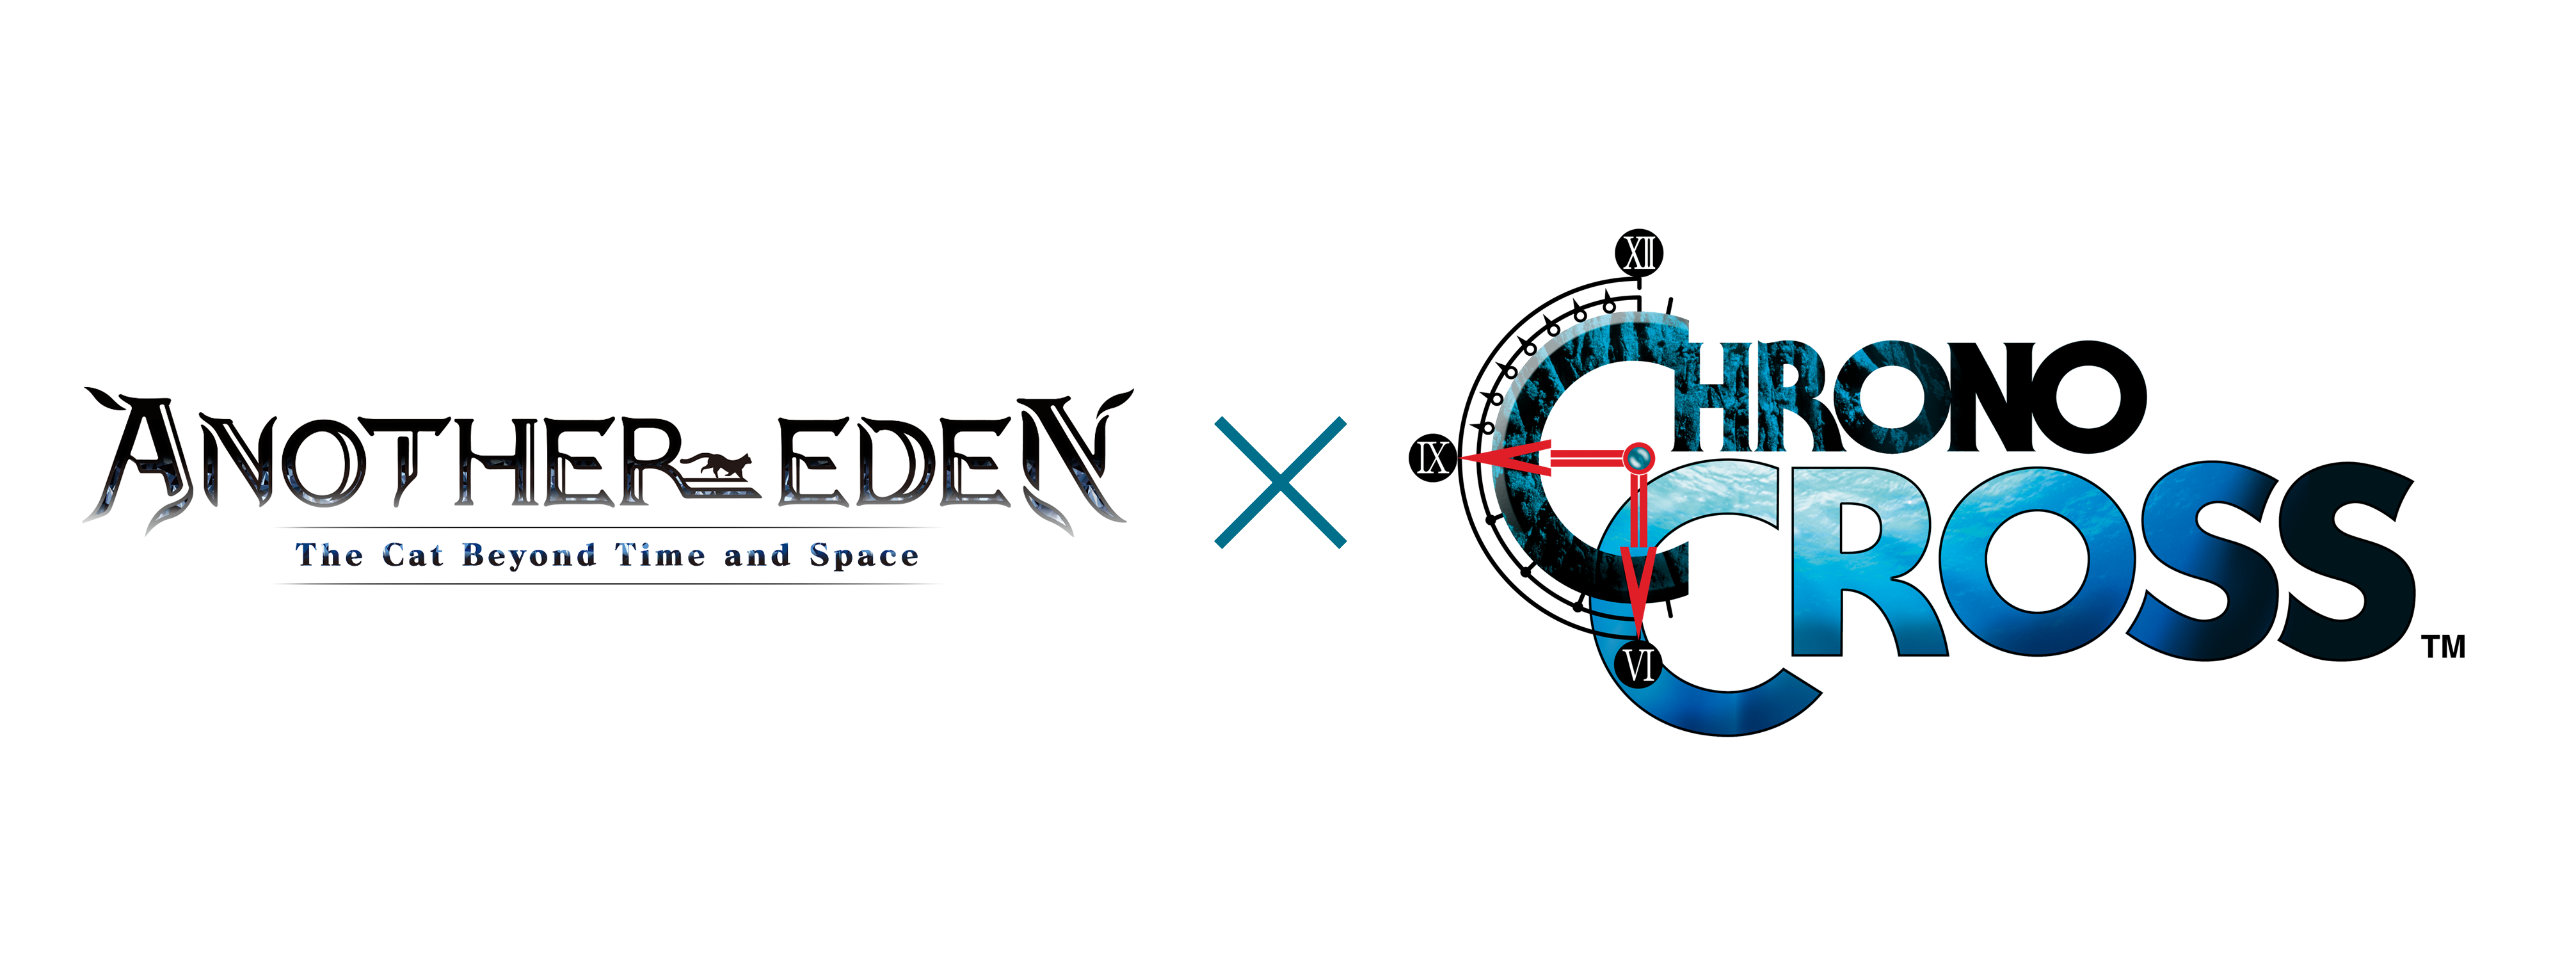 Another Eden The Cat Beyond Time and Space Logo 004 Crossover on White